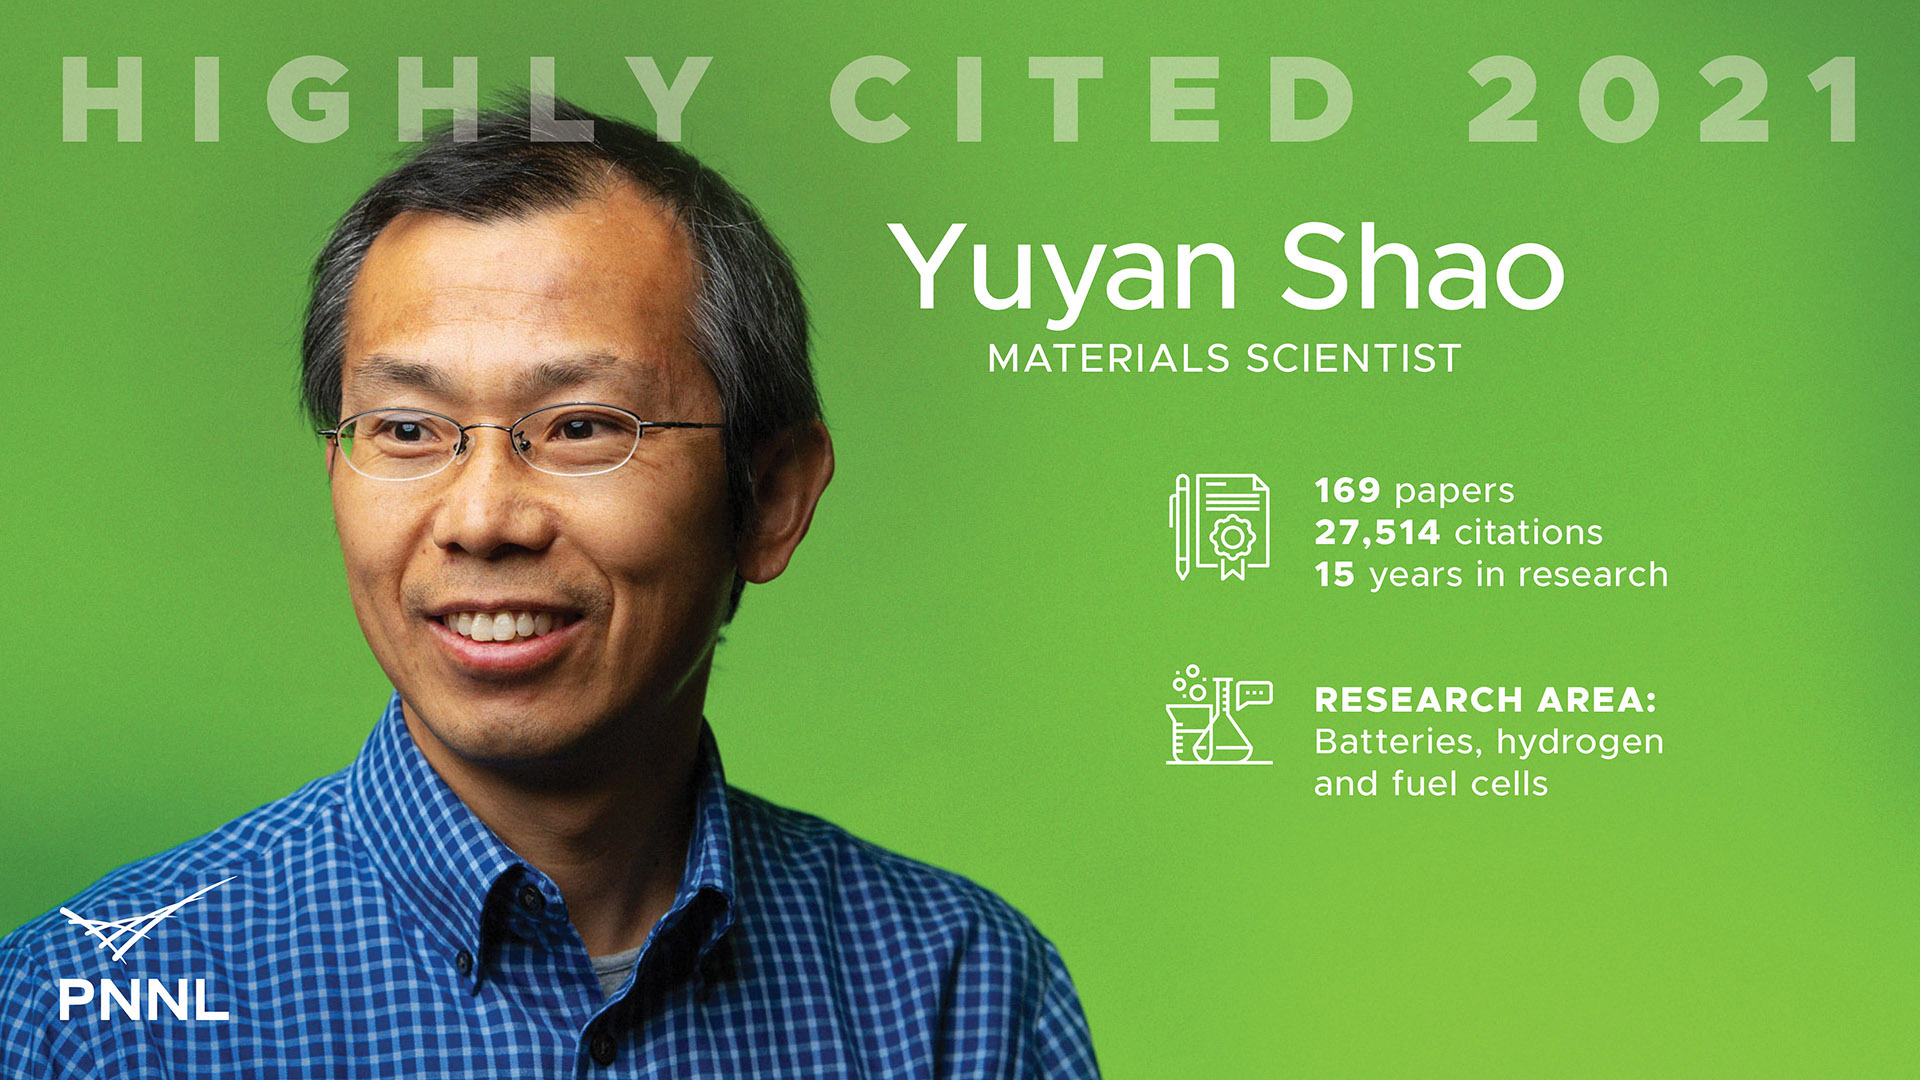 Yuyan Shao Highly Cited 2021 Fact Card